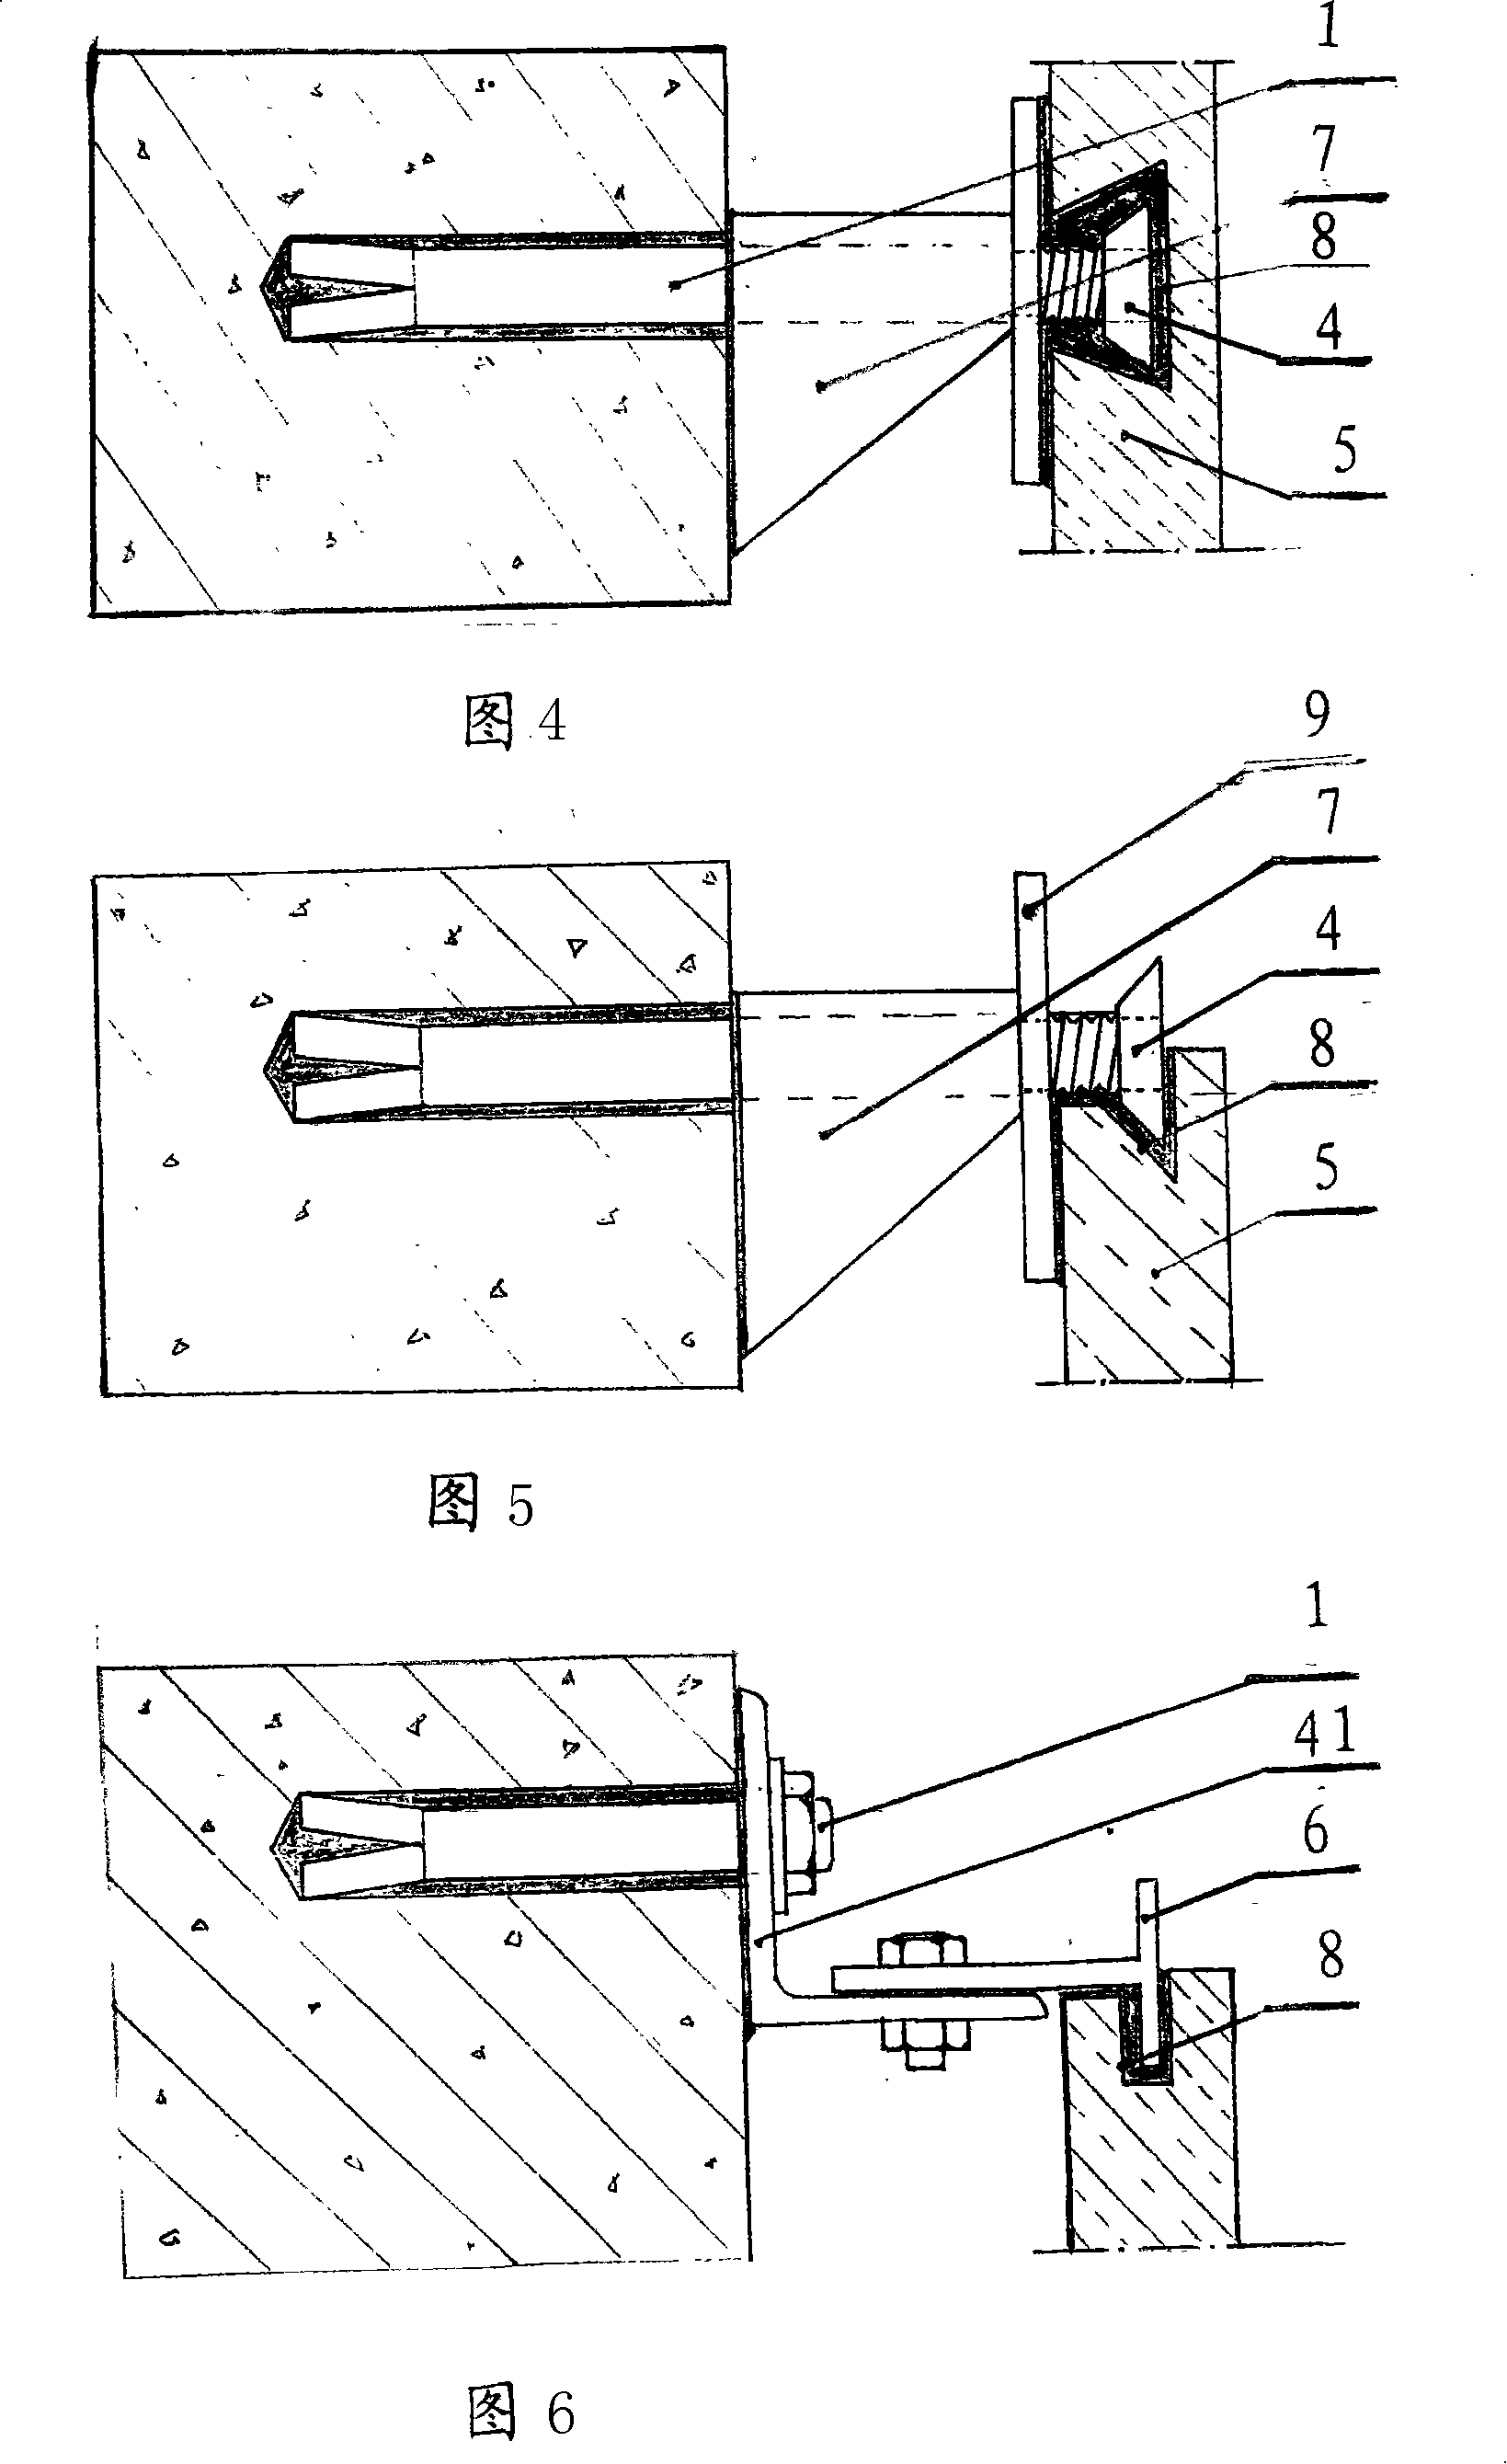 Mounting method for enhancing, expanding expansion screw bolt functions